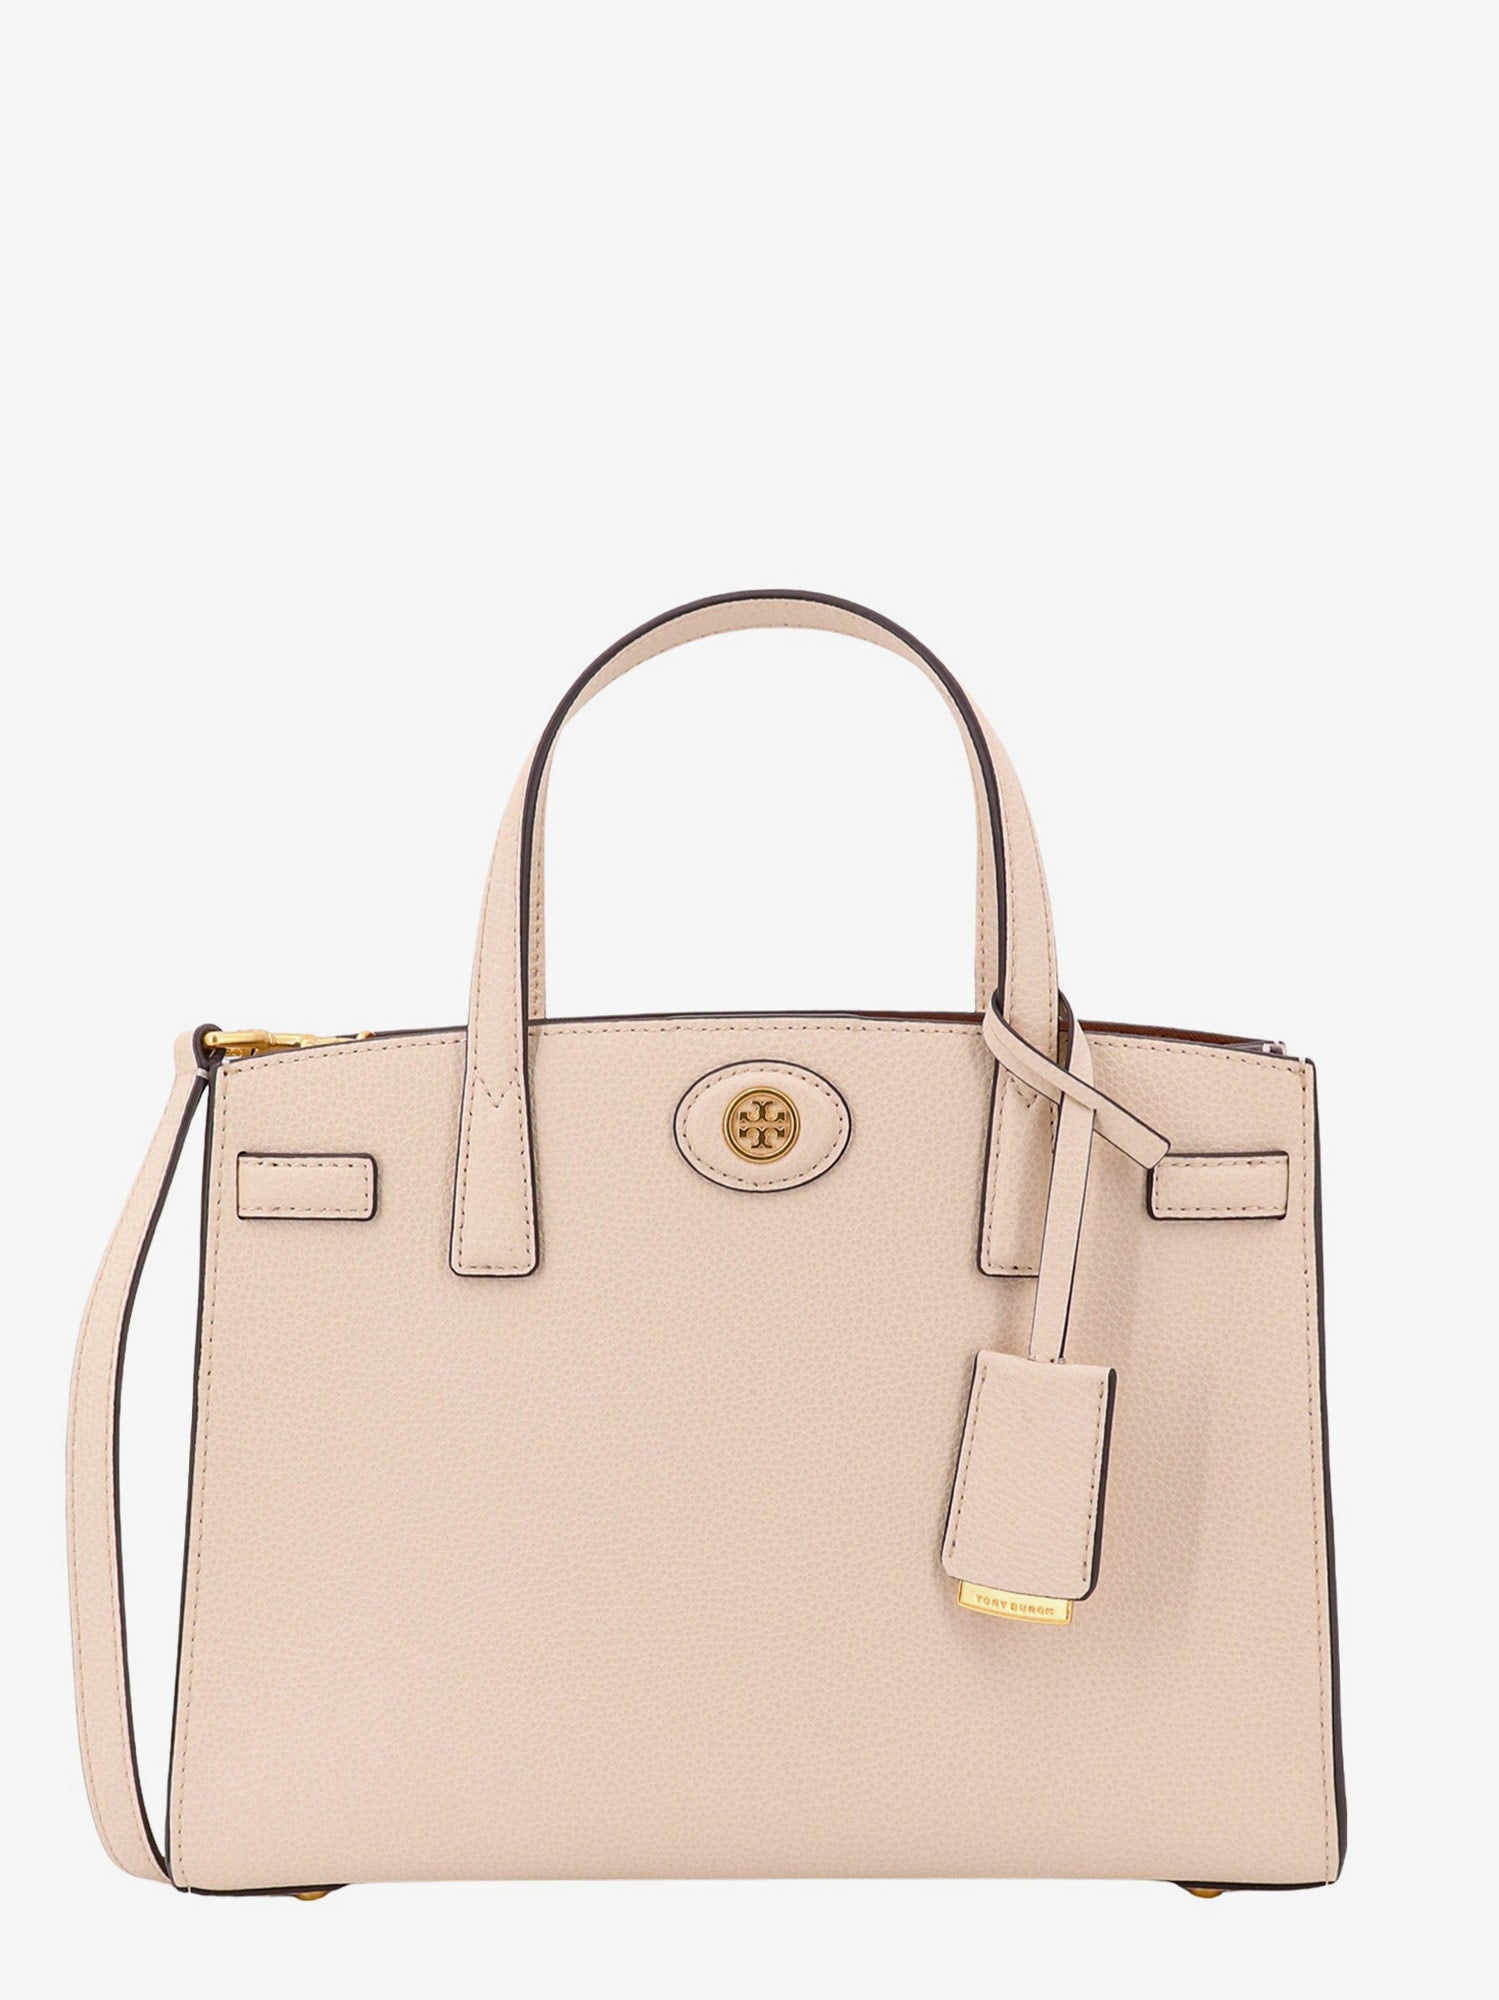 ROBINSON - TORY BURCH - Donna product